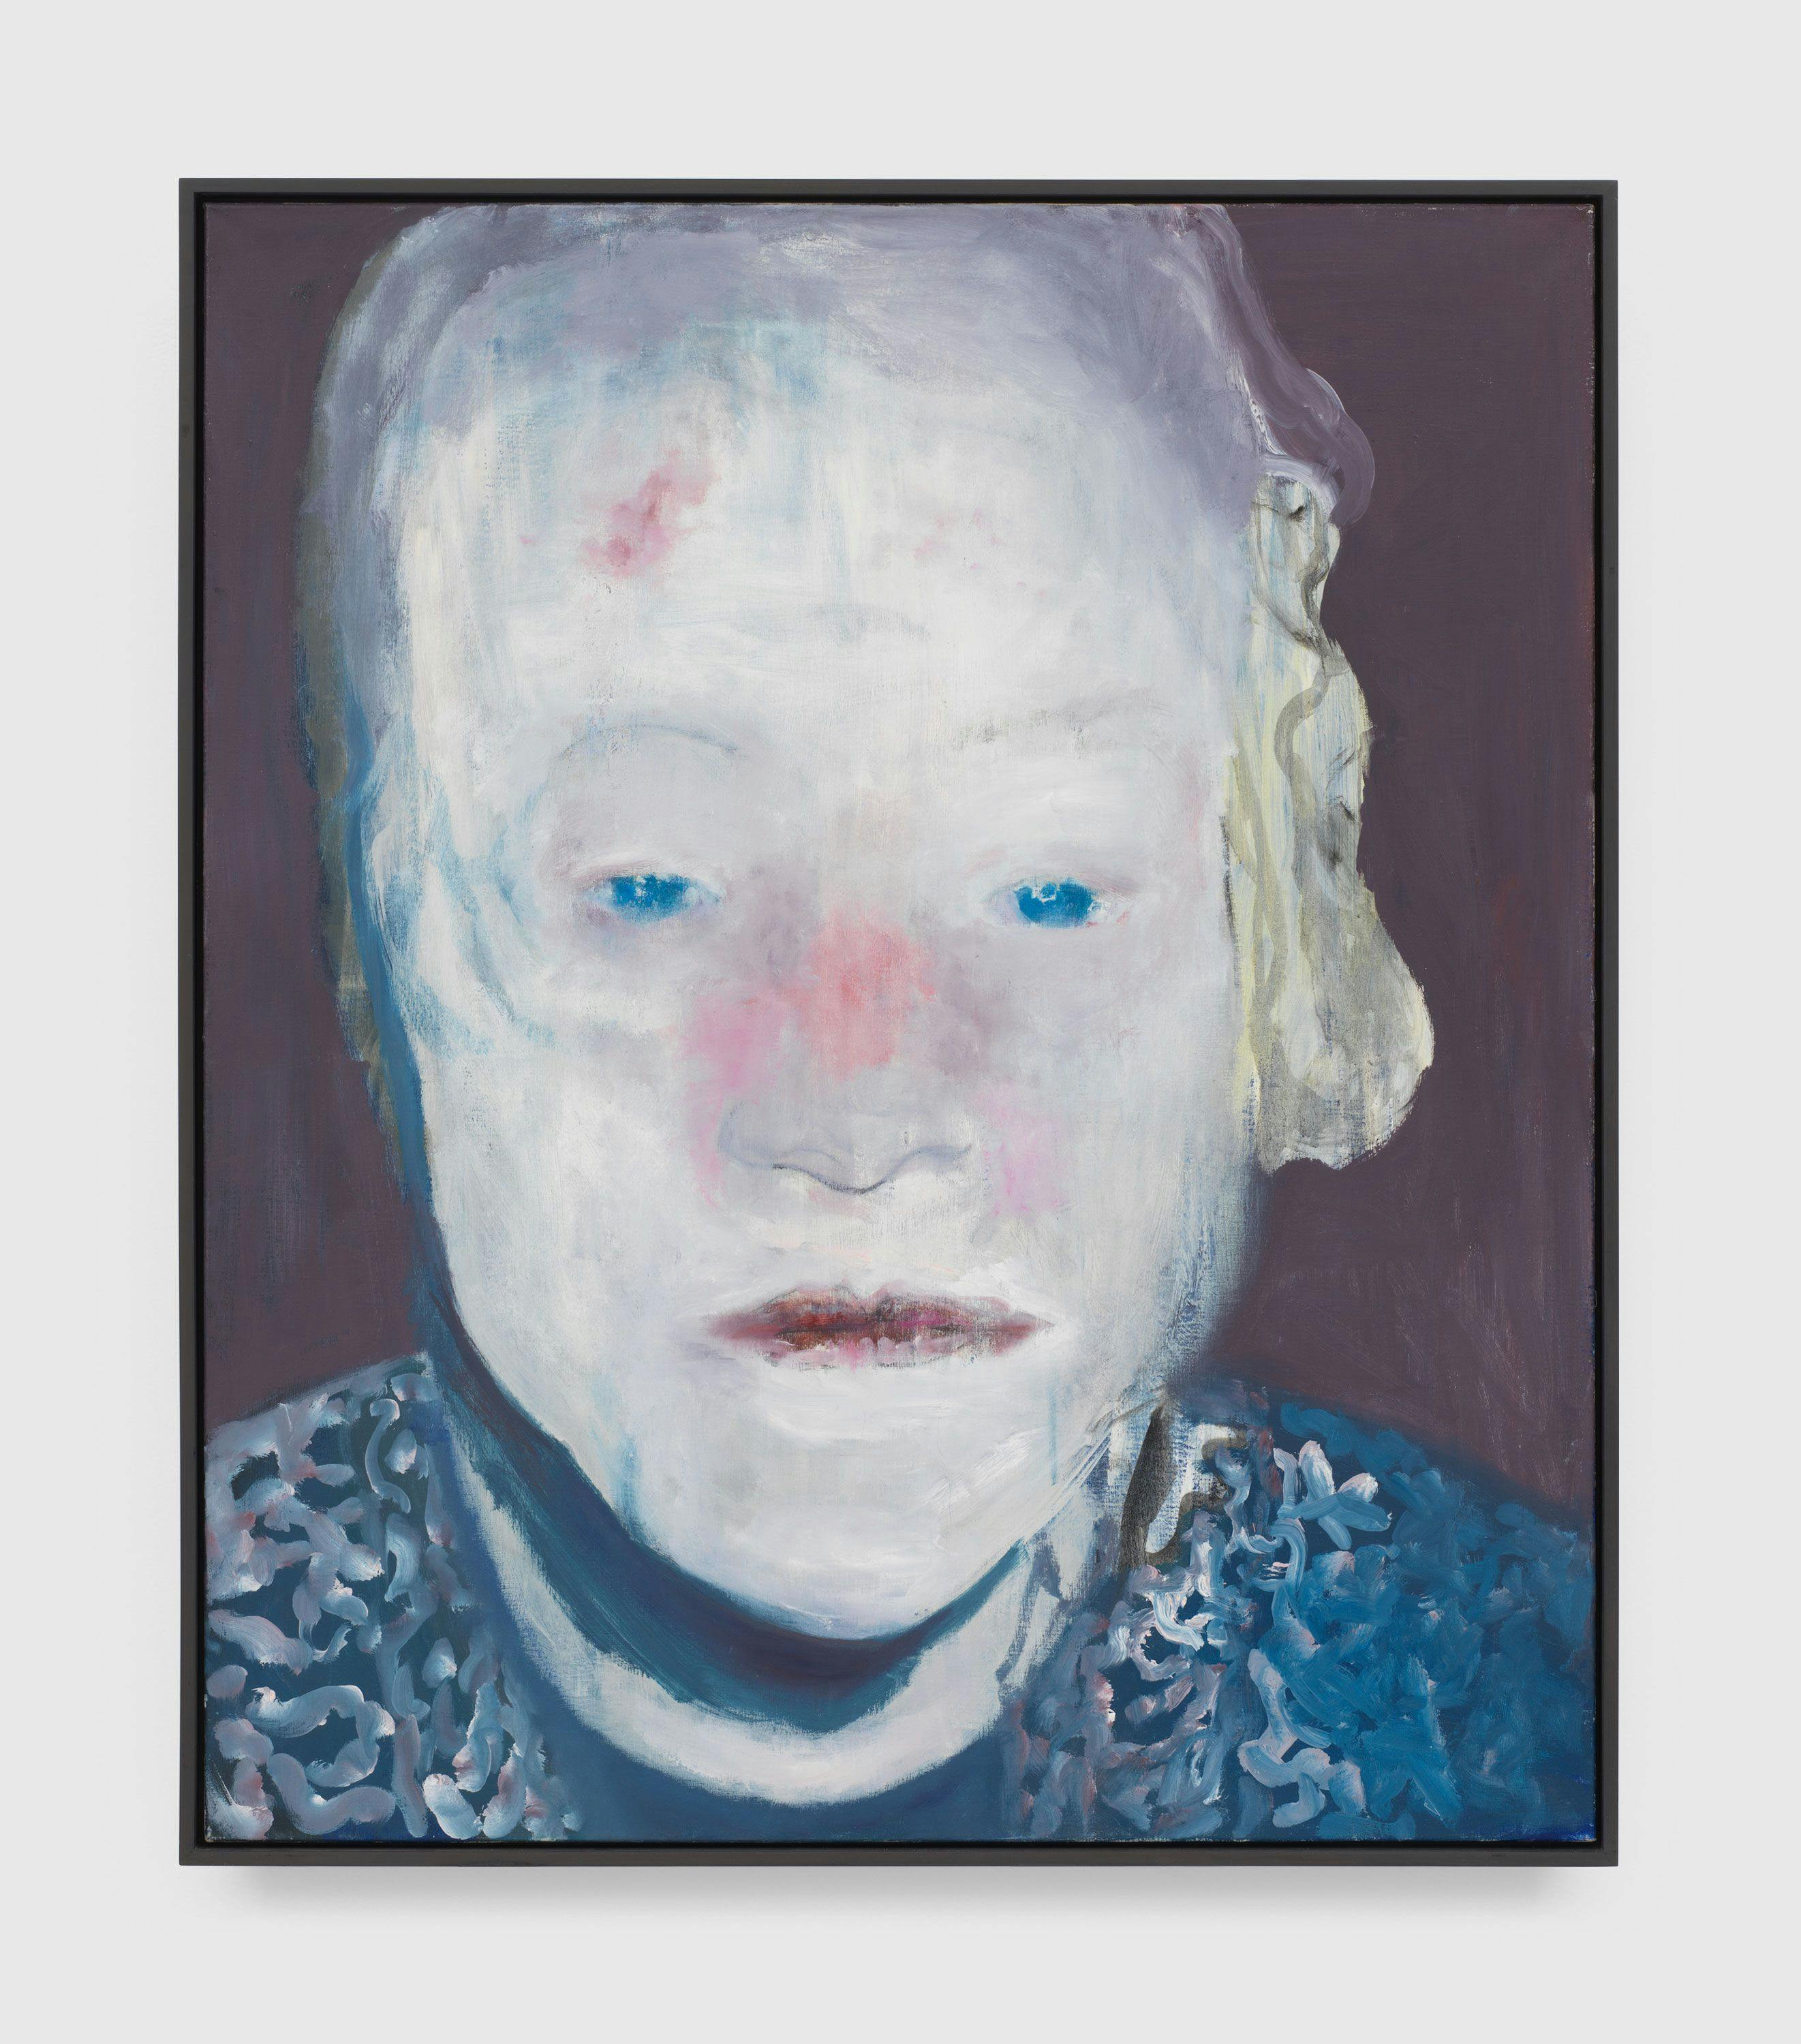 A painting by Marlene Dumas, titled The White Disease, dated 1985.